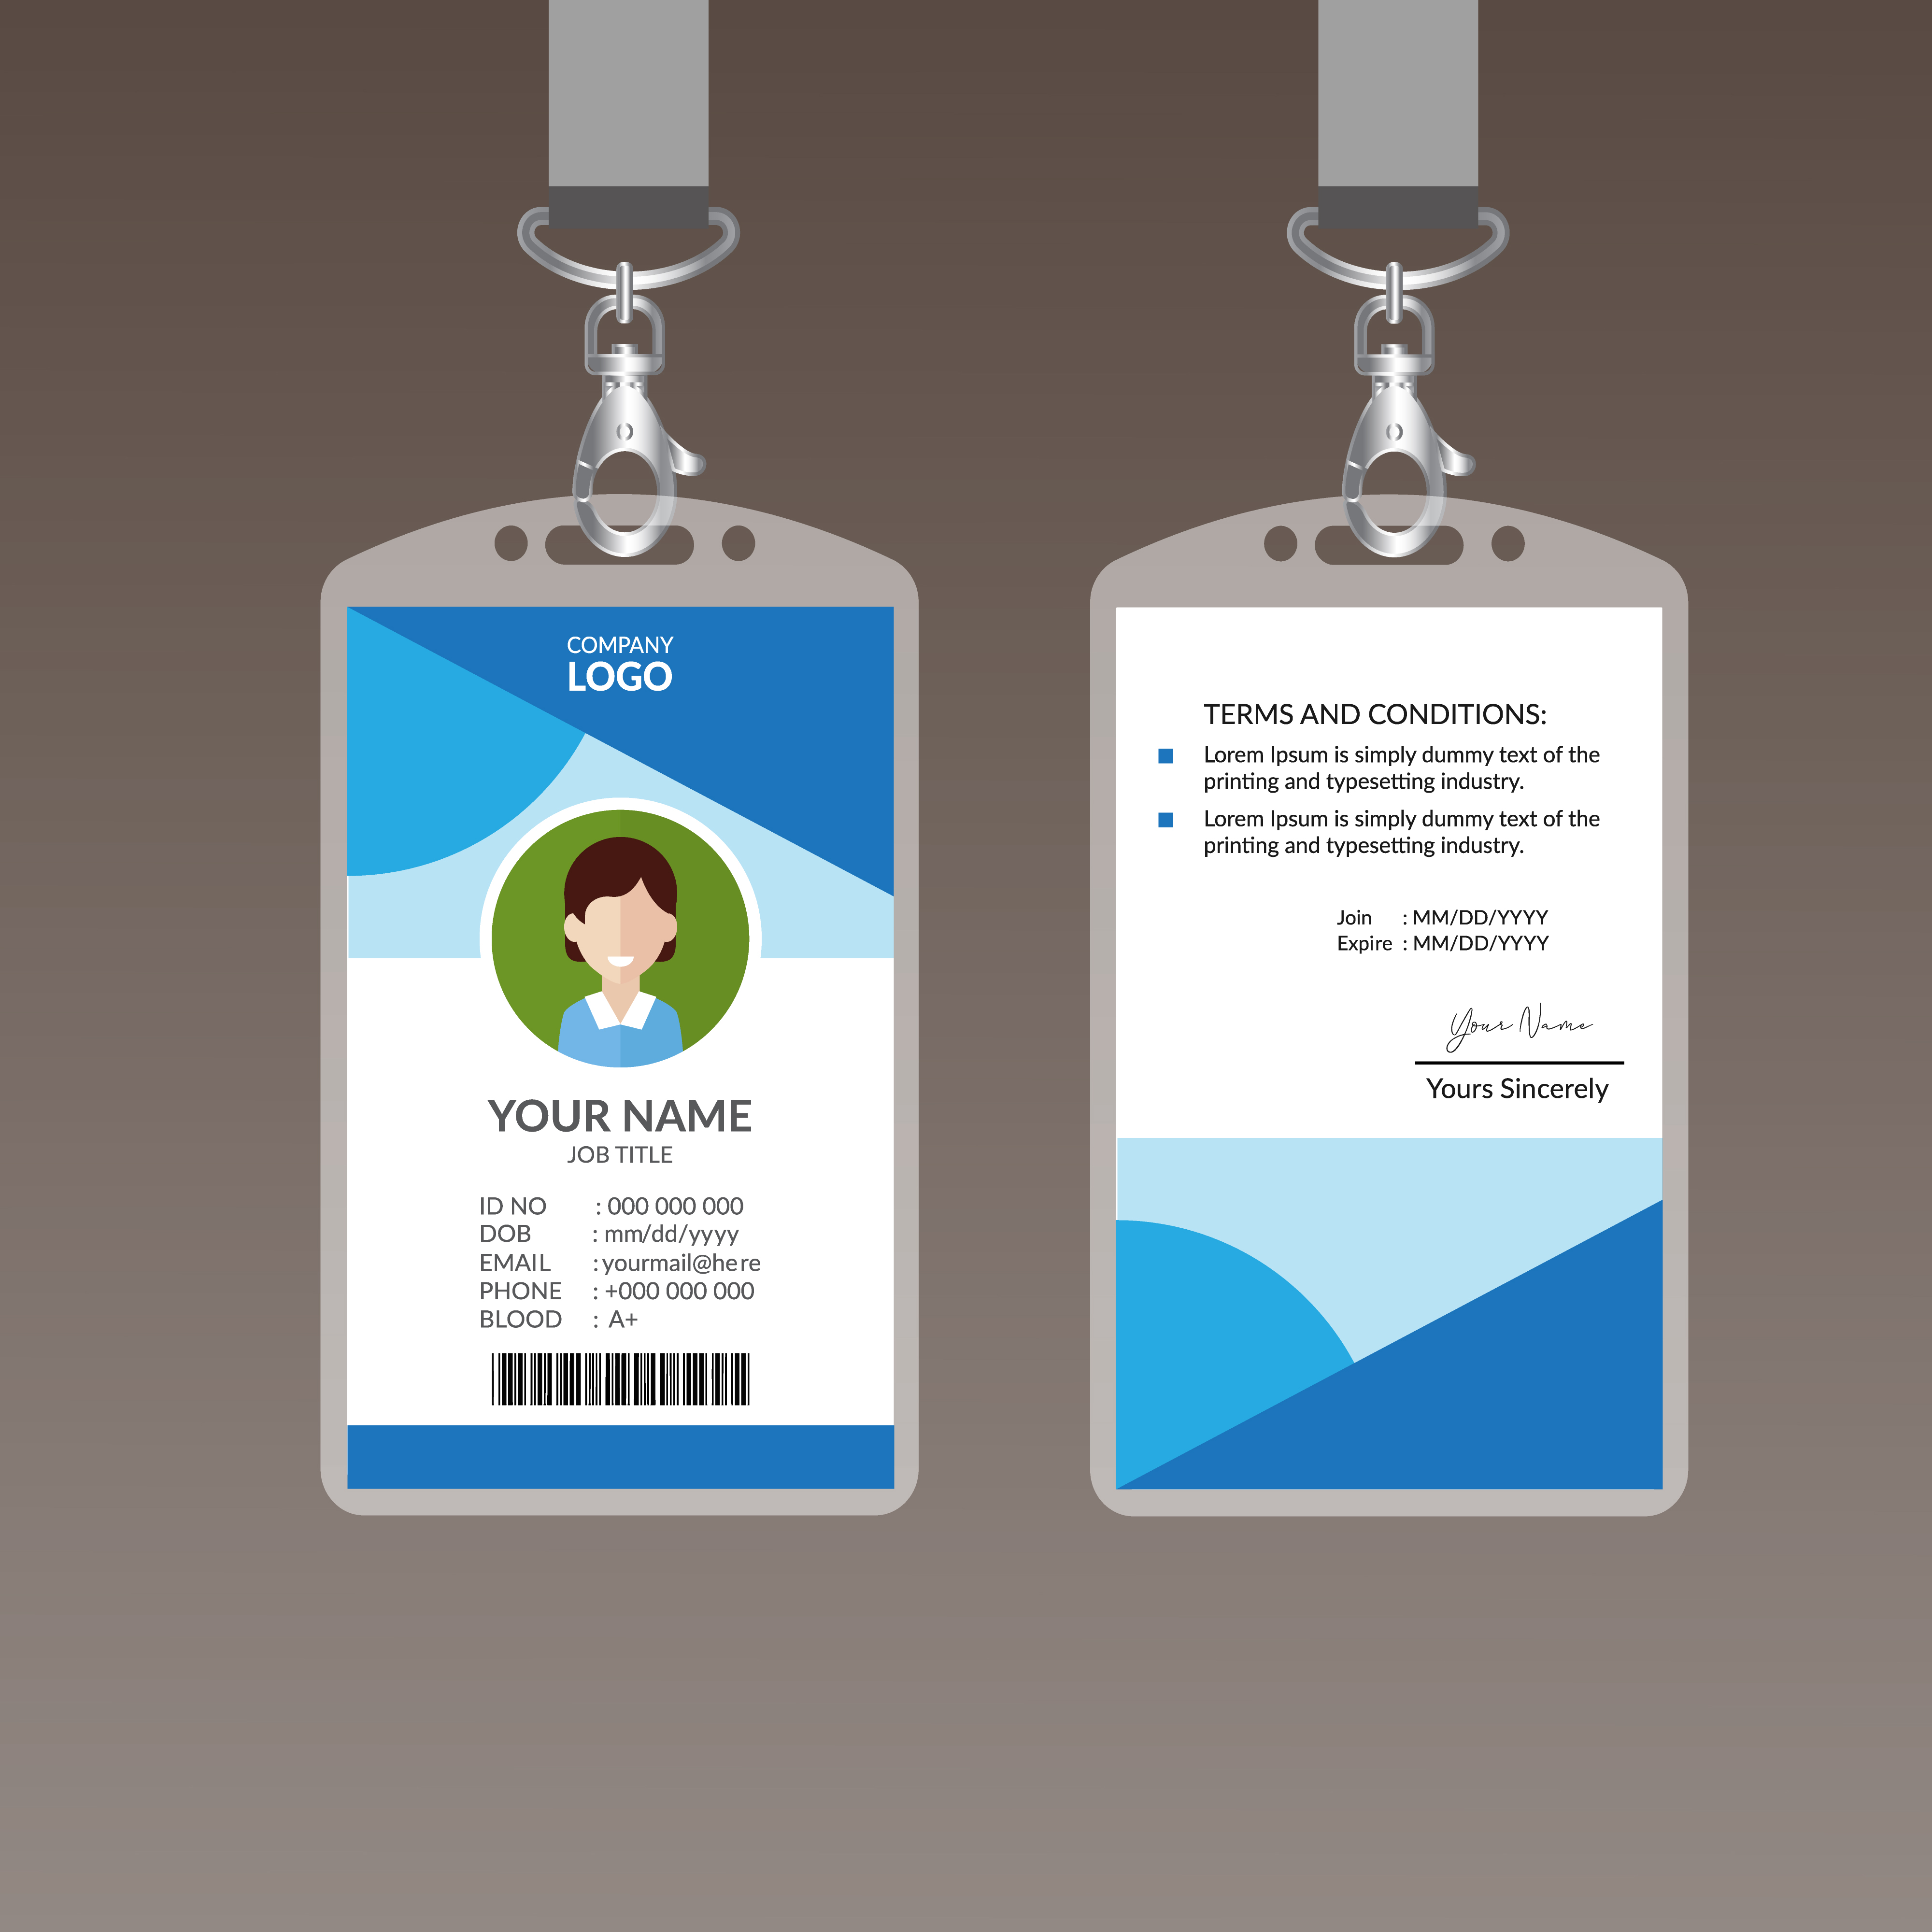 employee-id-card-size-in-cm-card-size